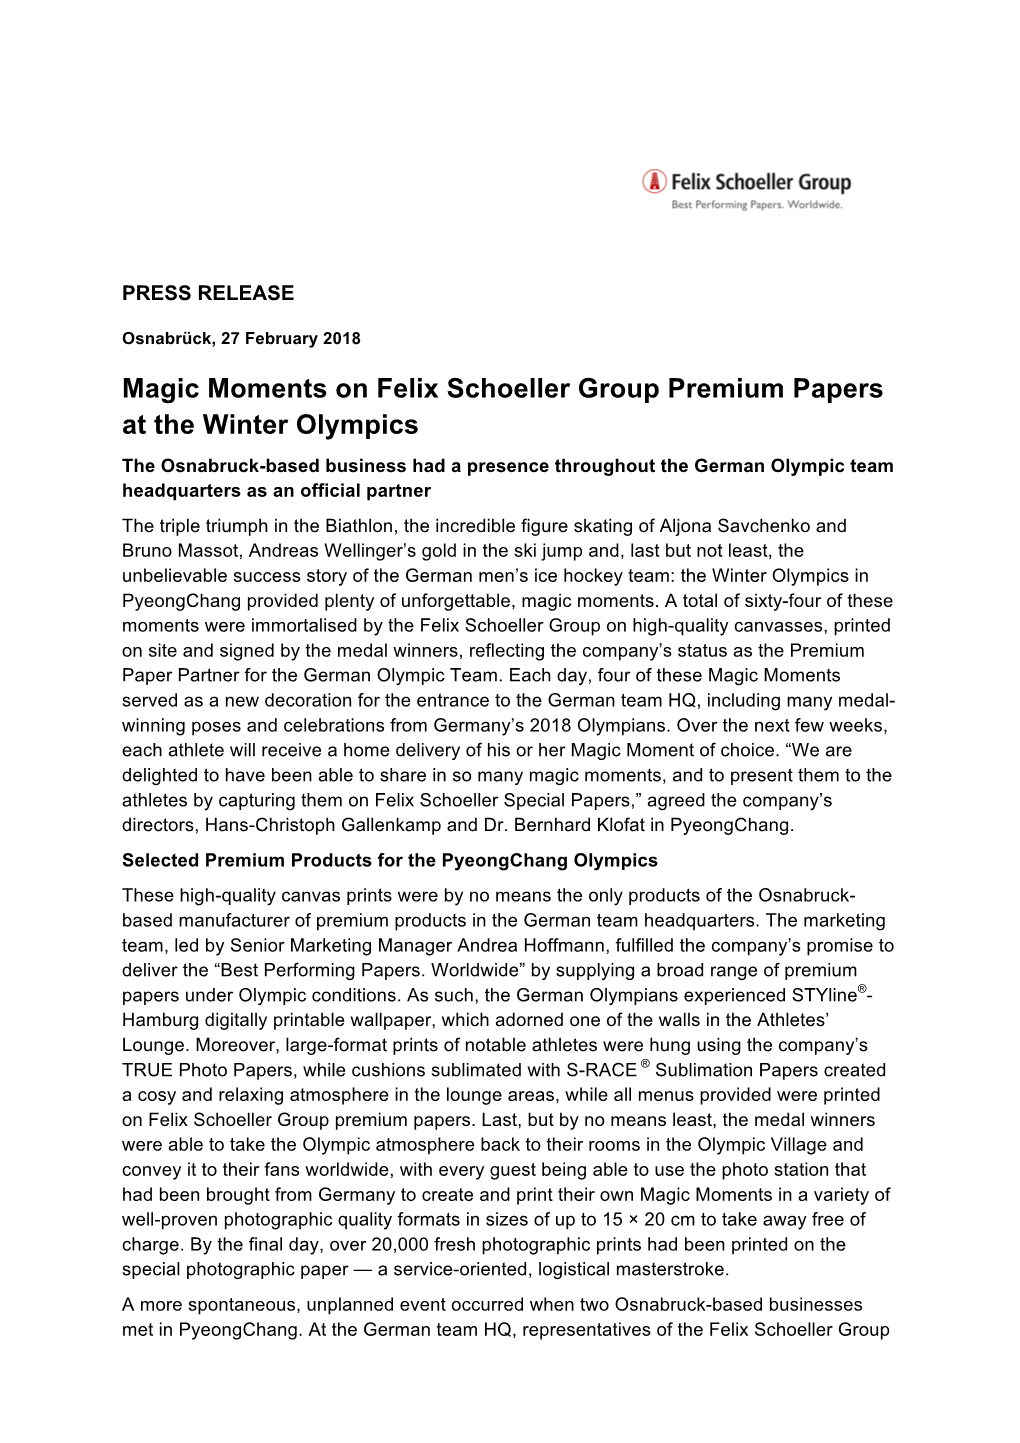 Magic Moments on Felix Schoeller Group Premium Papers at the Winter Olympics